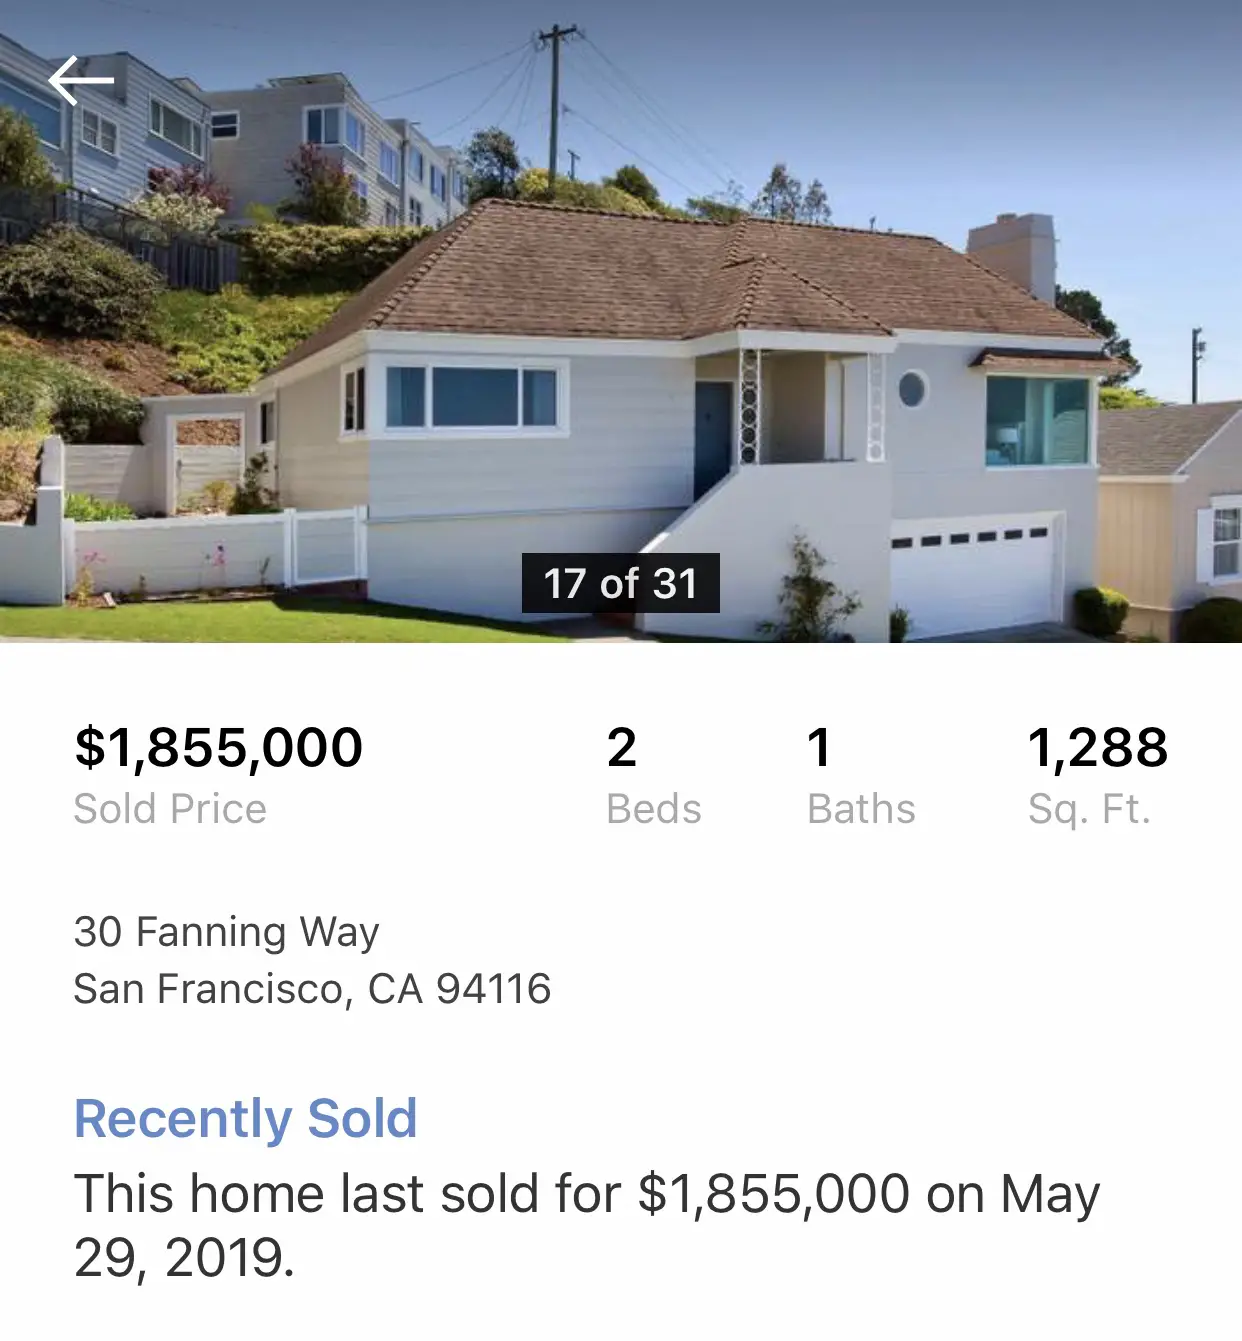 How Much House Can I Afford Making 100k A Year